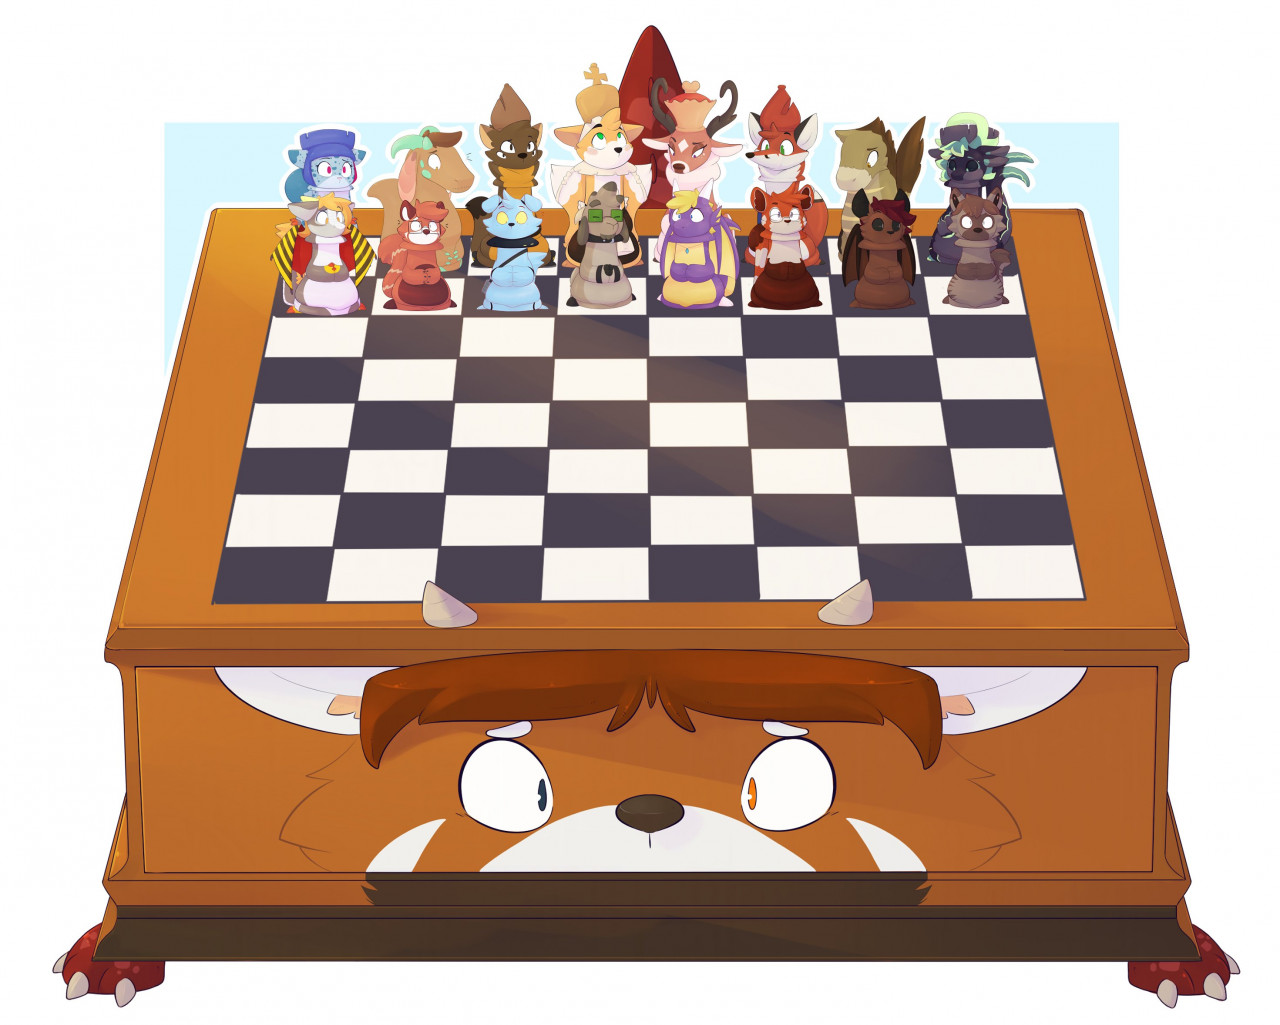 Chess Board with pieces, png overlay. by lewis4721 on DeviantArt